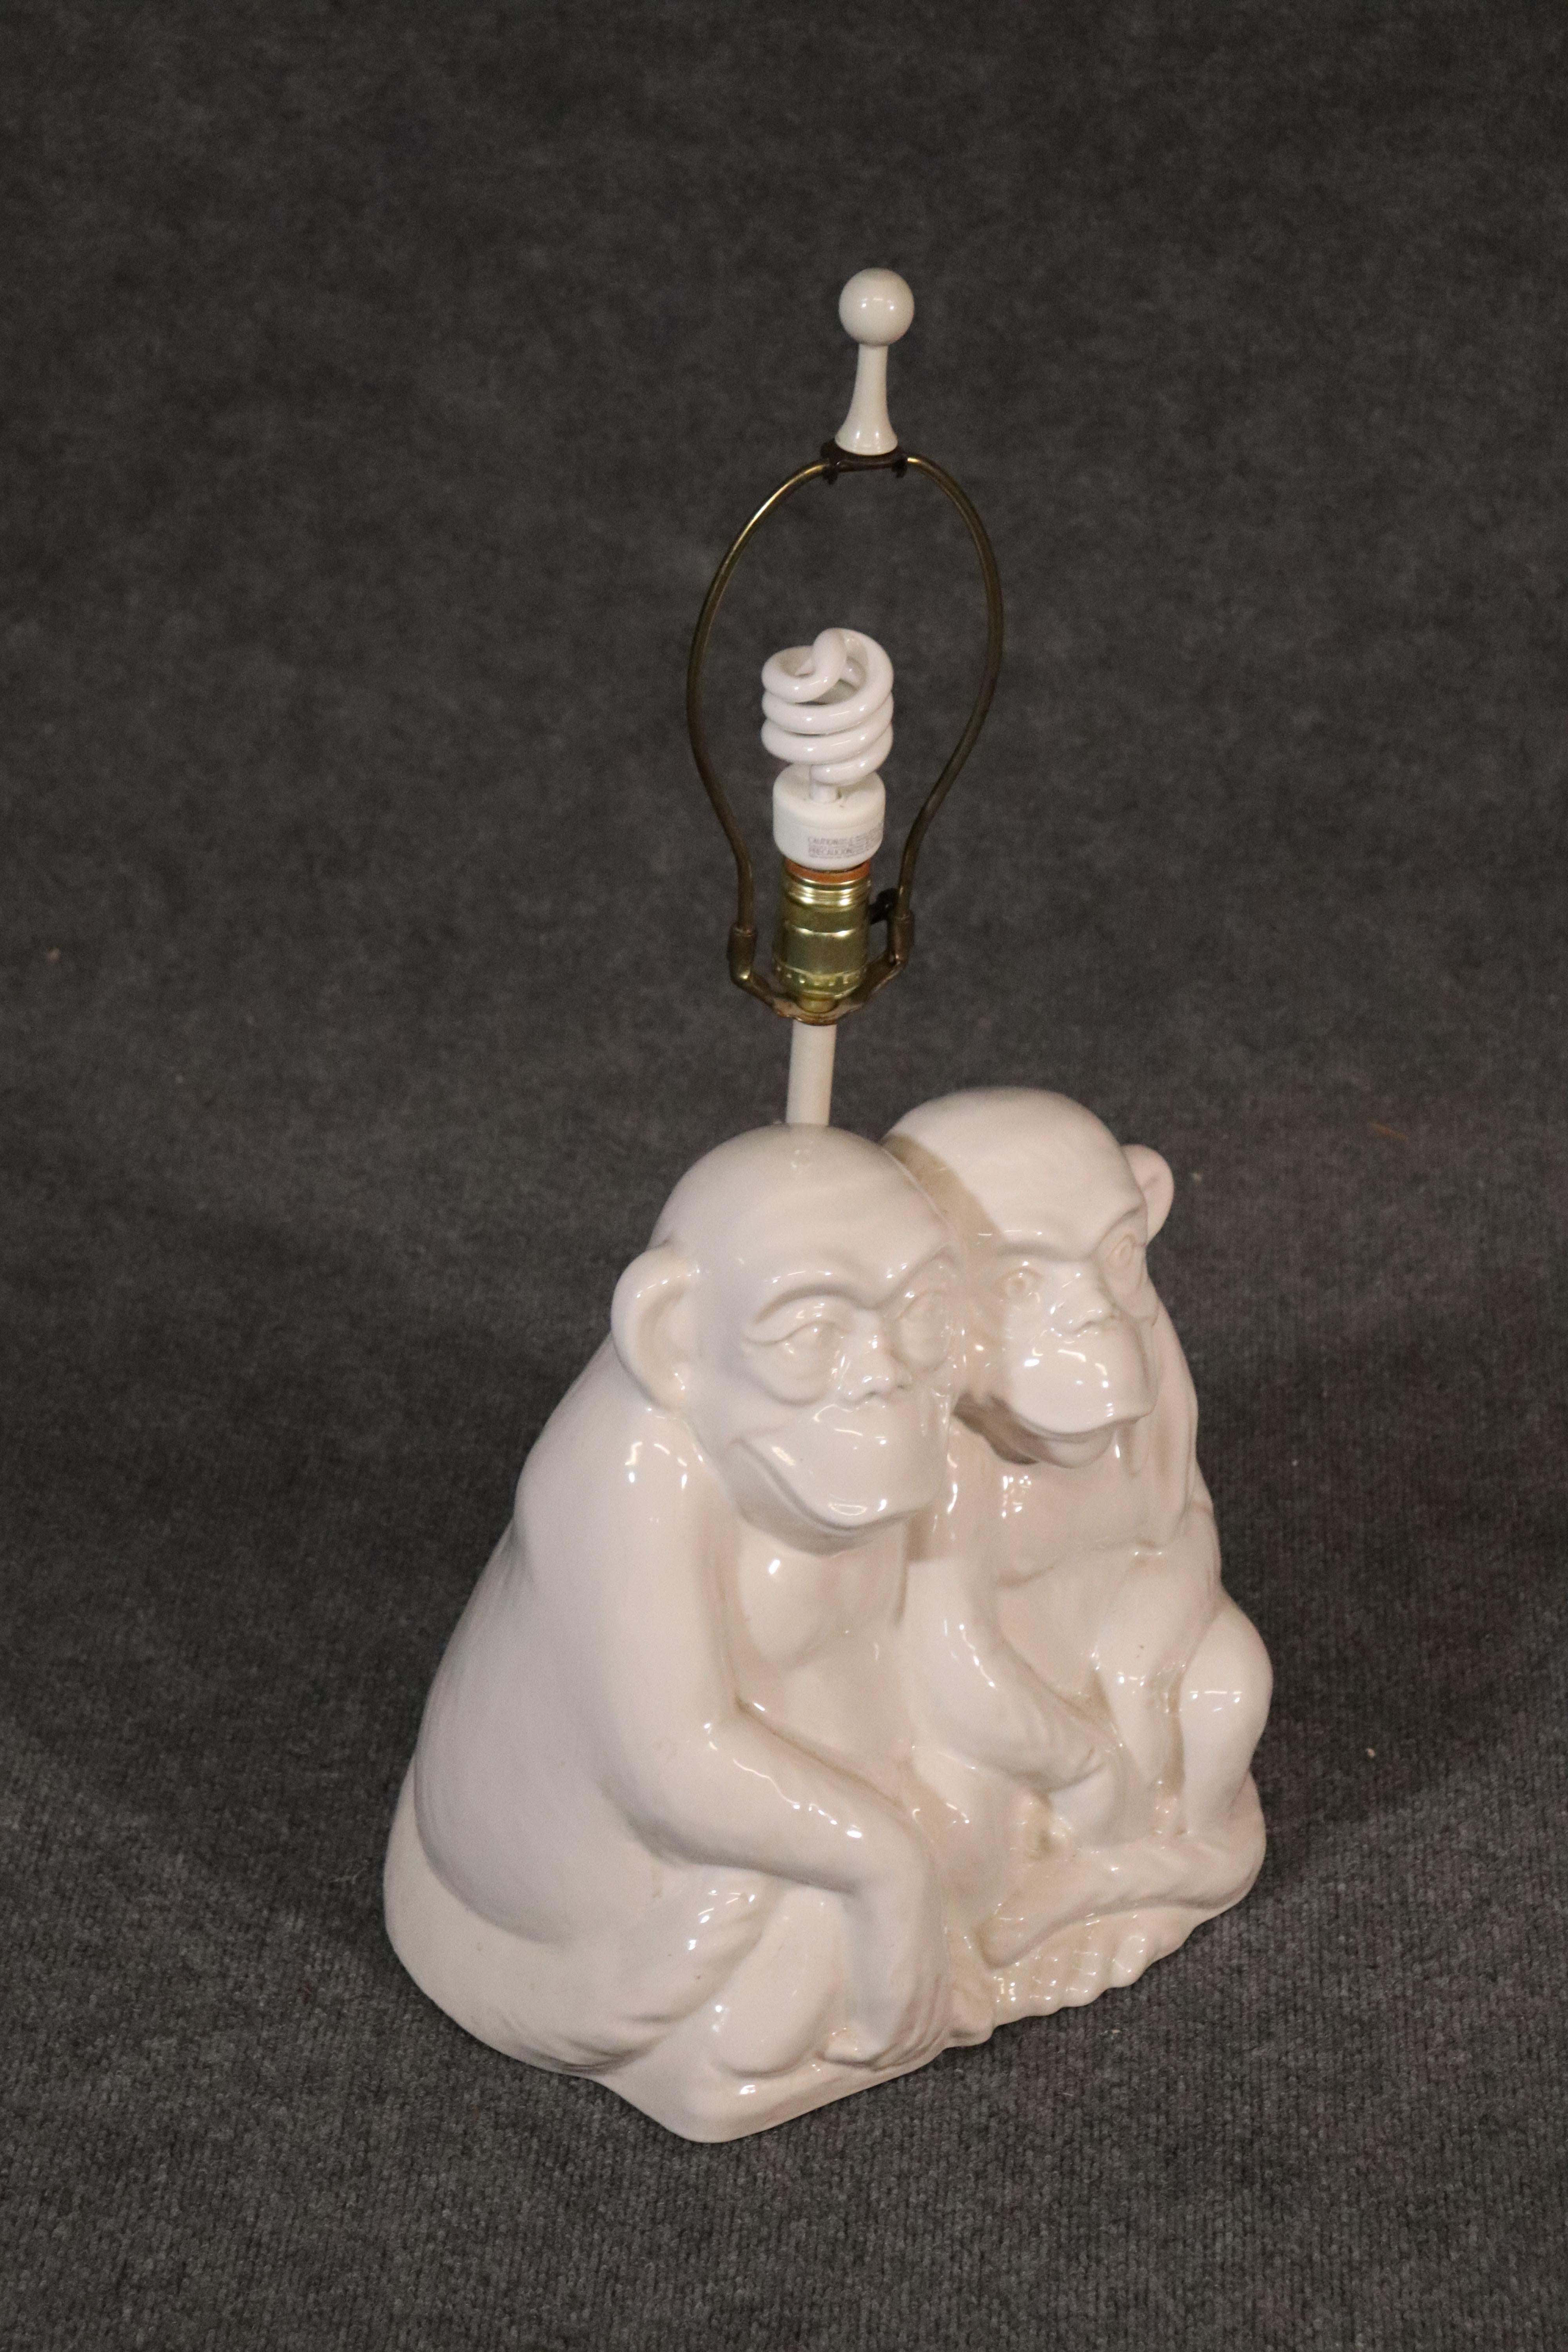 This vintage 1950s era lamp depicts two monkeys hugging each other. The lamp is in fundamentally good condition with hairline stress cracks on the back. The lamp is still completely usable and can be used every day. Measures 26.5 tall x 14 wide x 9